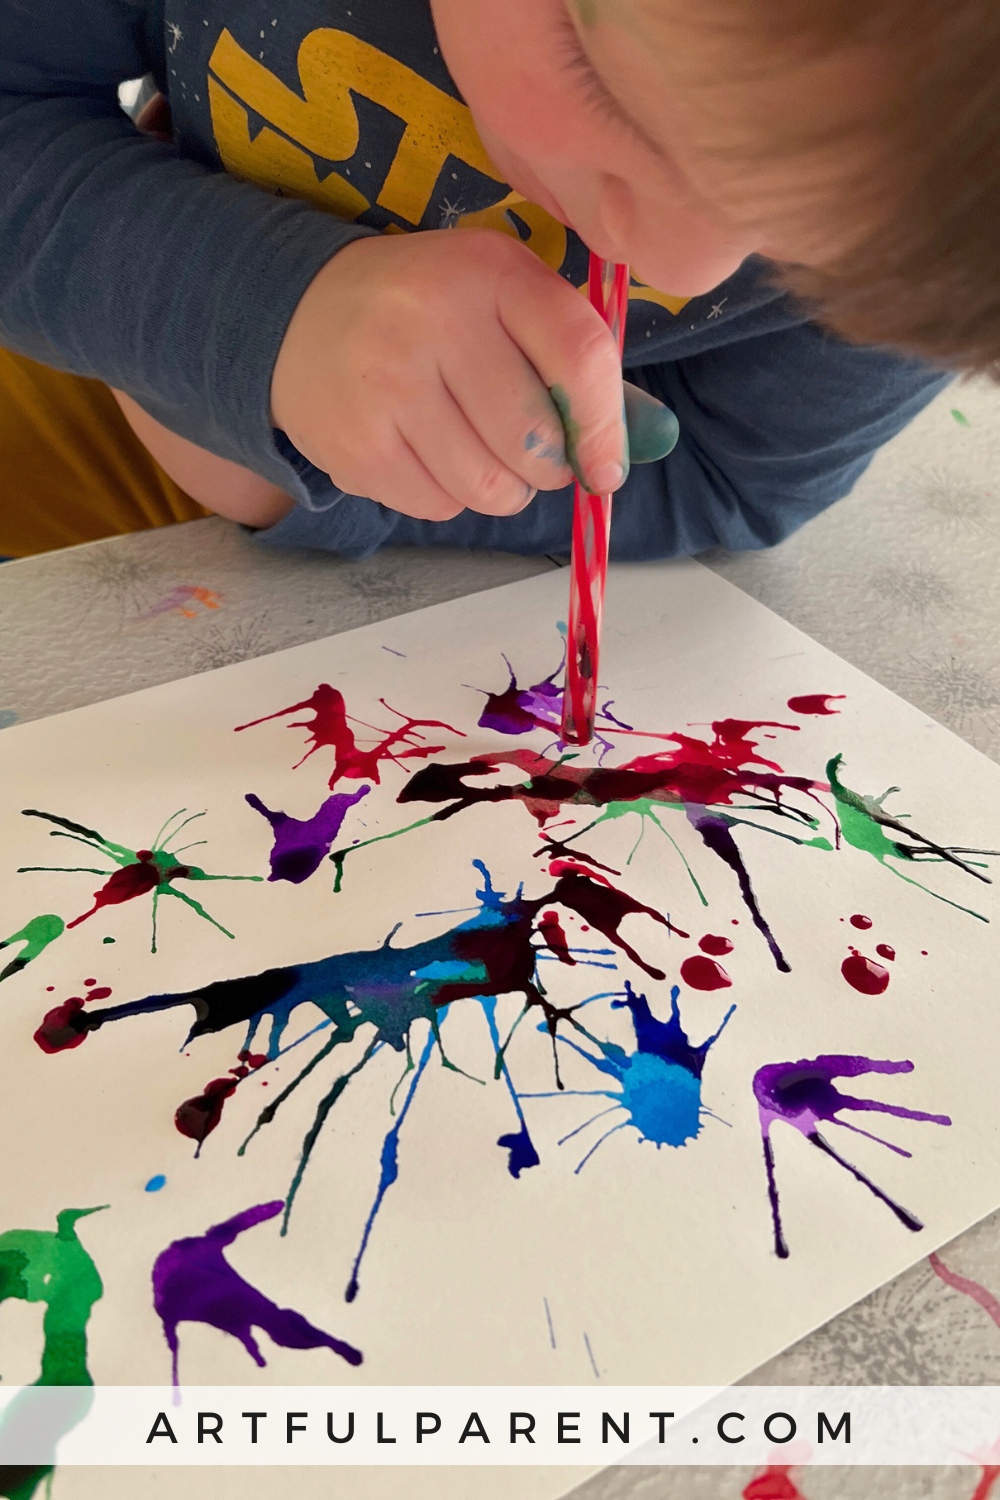 How to Do Blow Painting with Straws